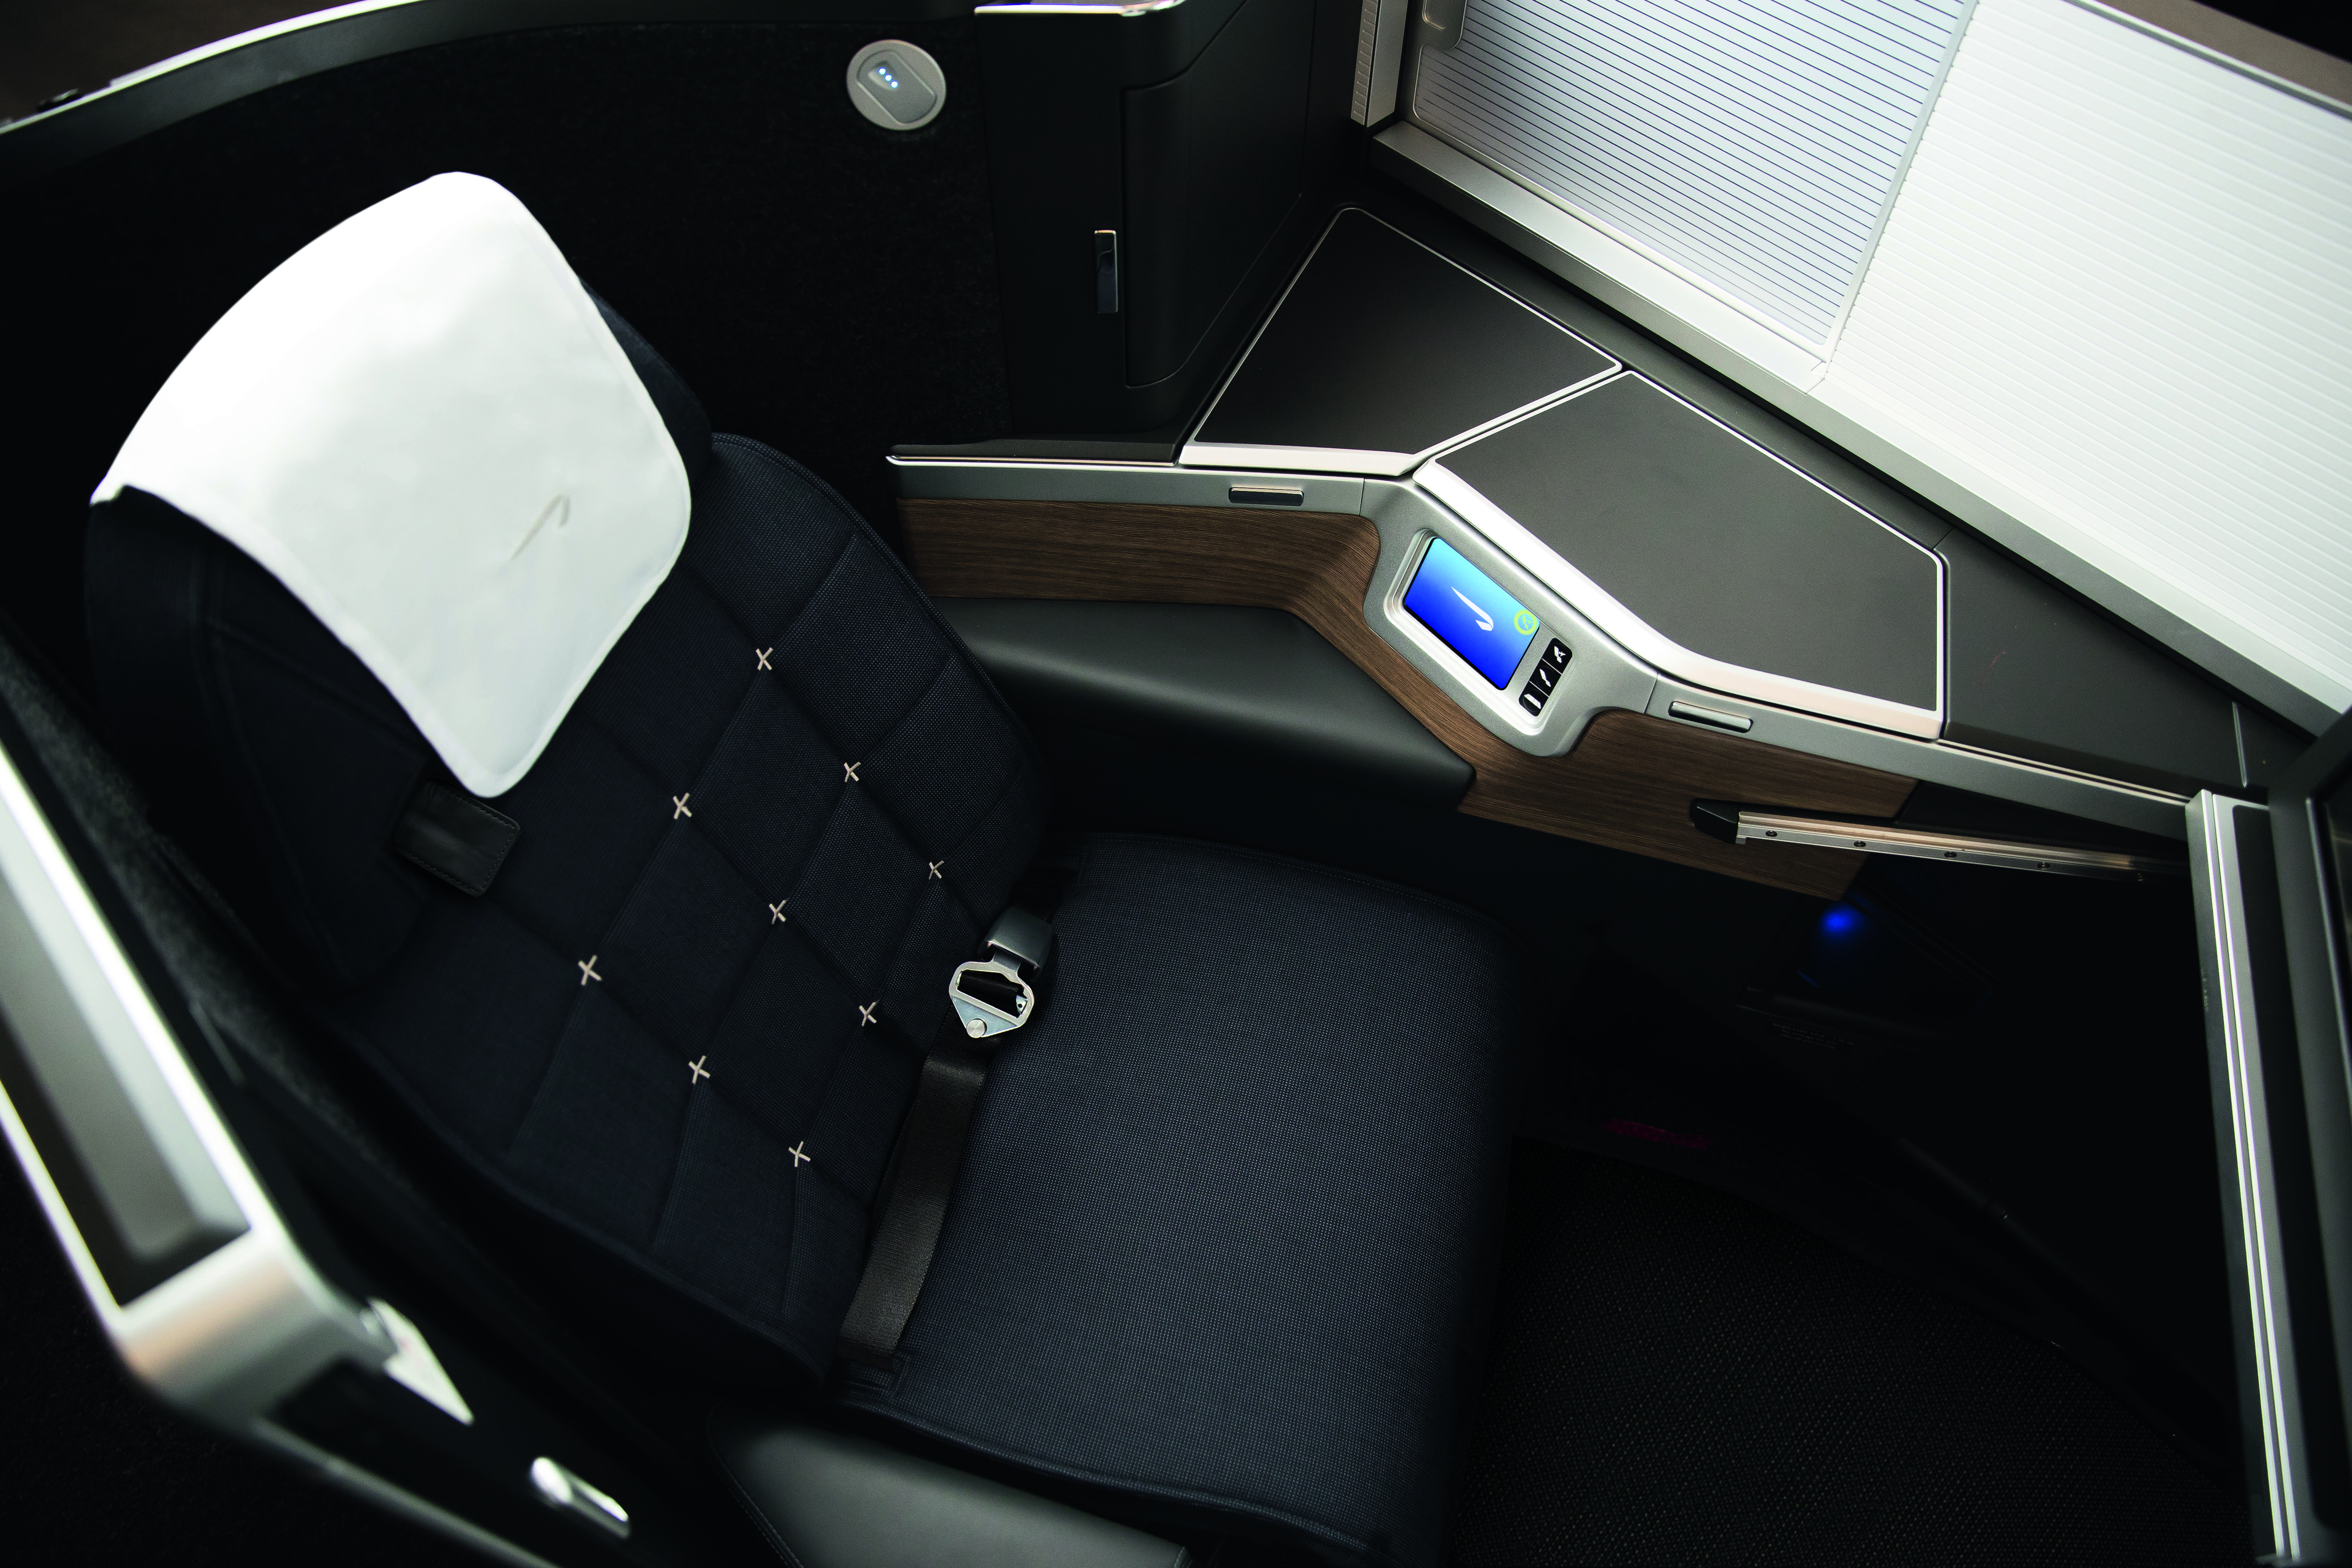 Club Suite will be launched on an A350 aircraft (British Airways/PA)